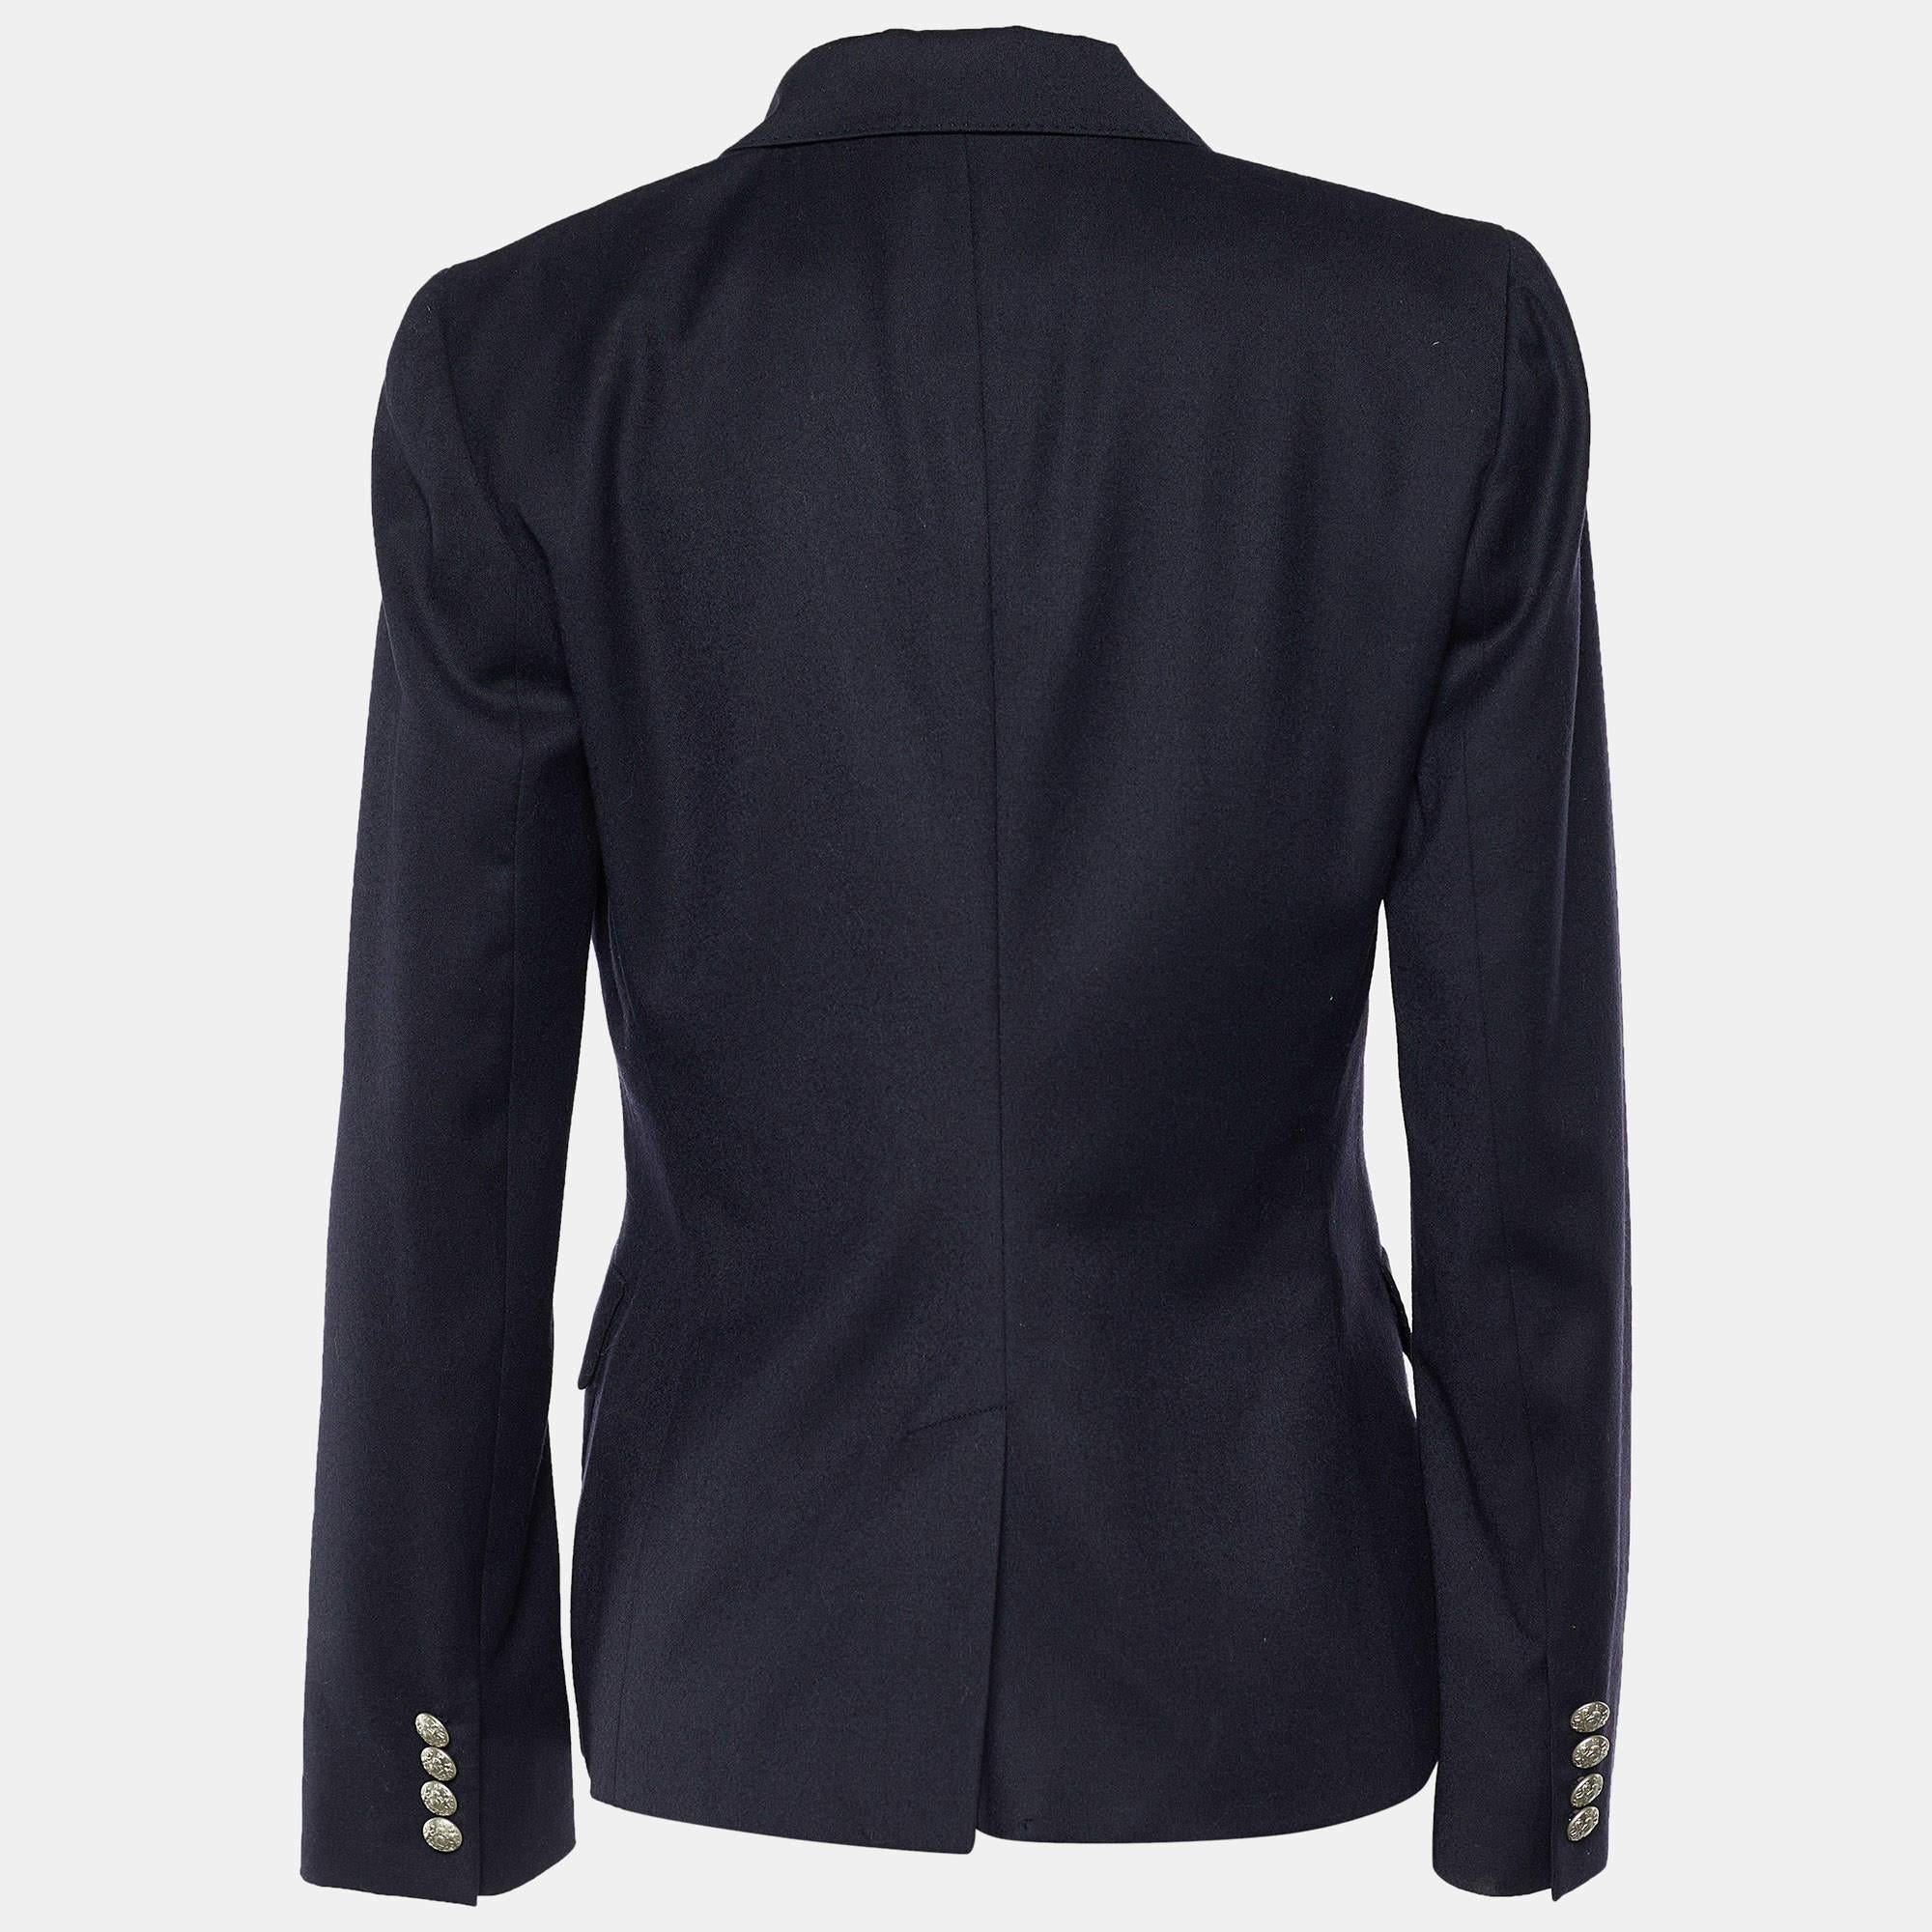 Create your own style statement with this gorgeous Ralph Lauren blazer designed in a chic style. Tailor-made for the fashionista in you, this navy blue beauty will let you stand out from the crowd. This formal blazer displays embroidery on the front